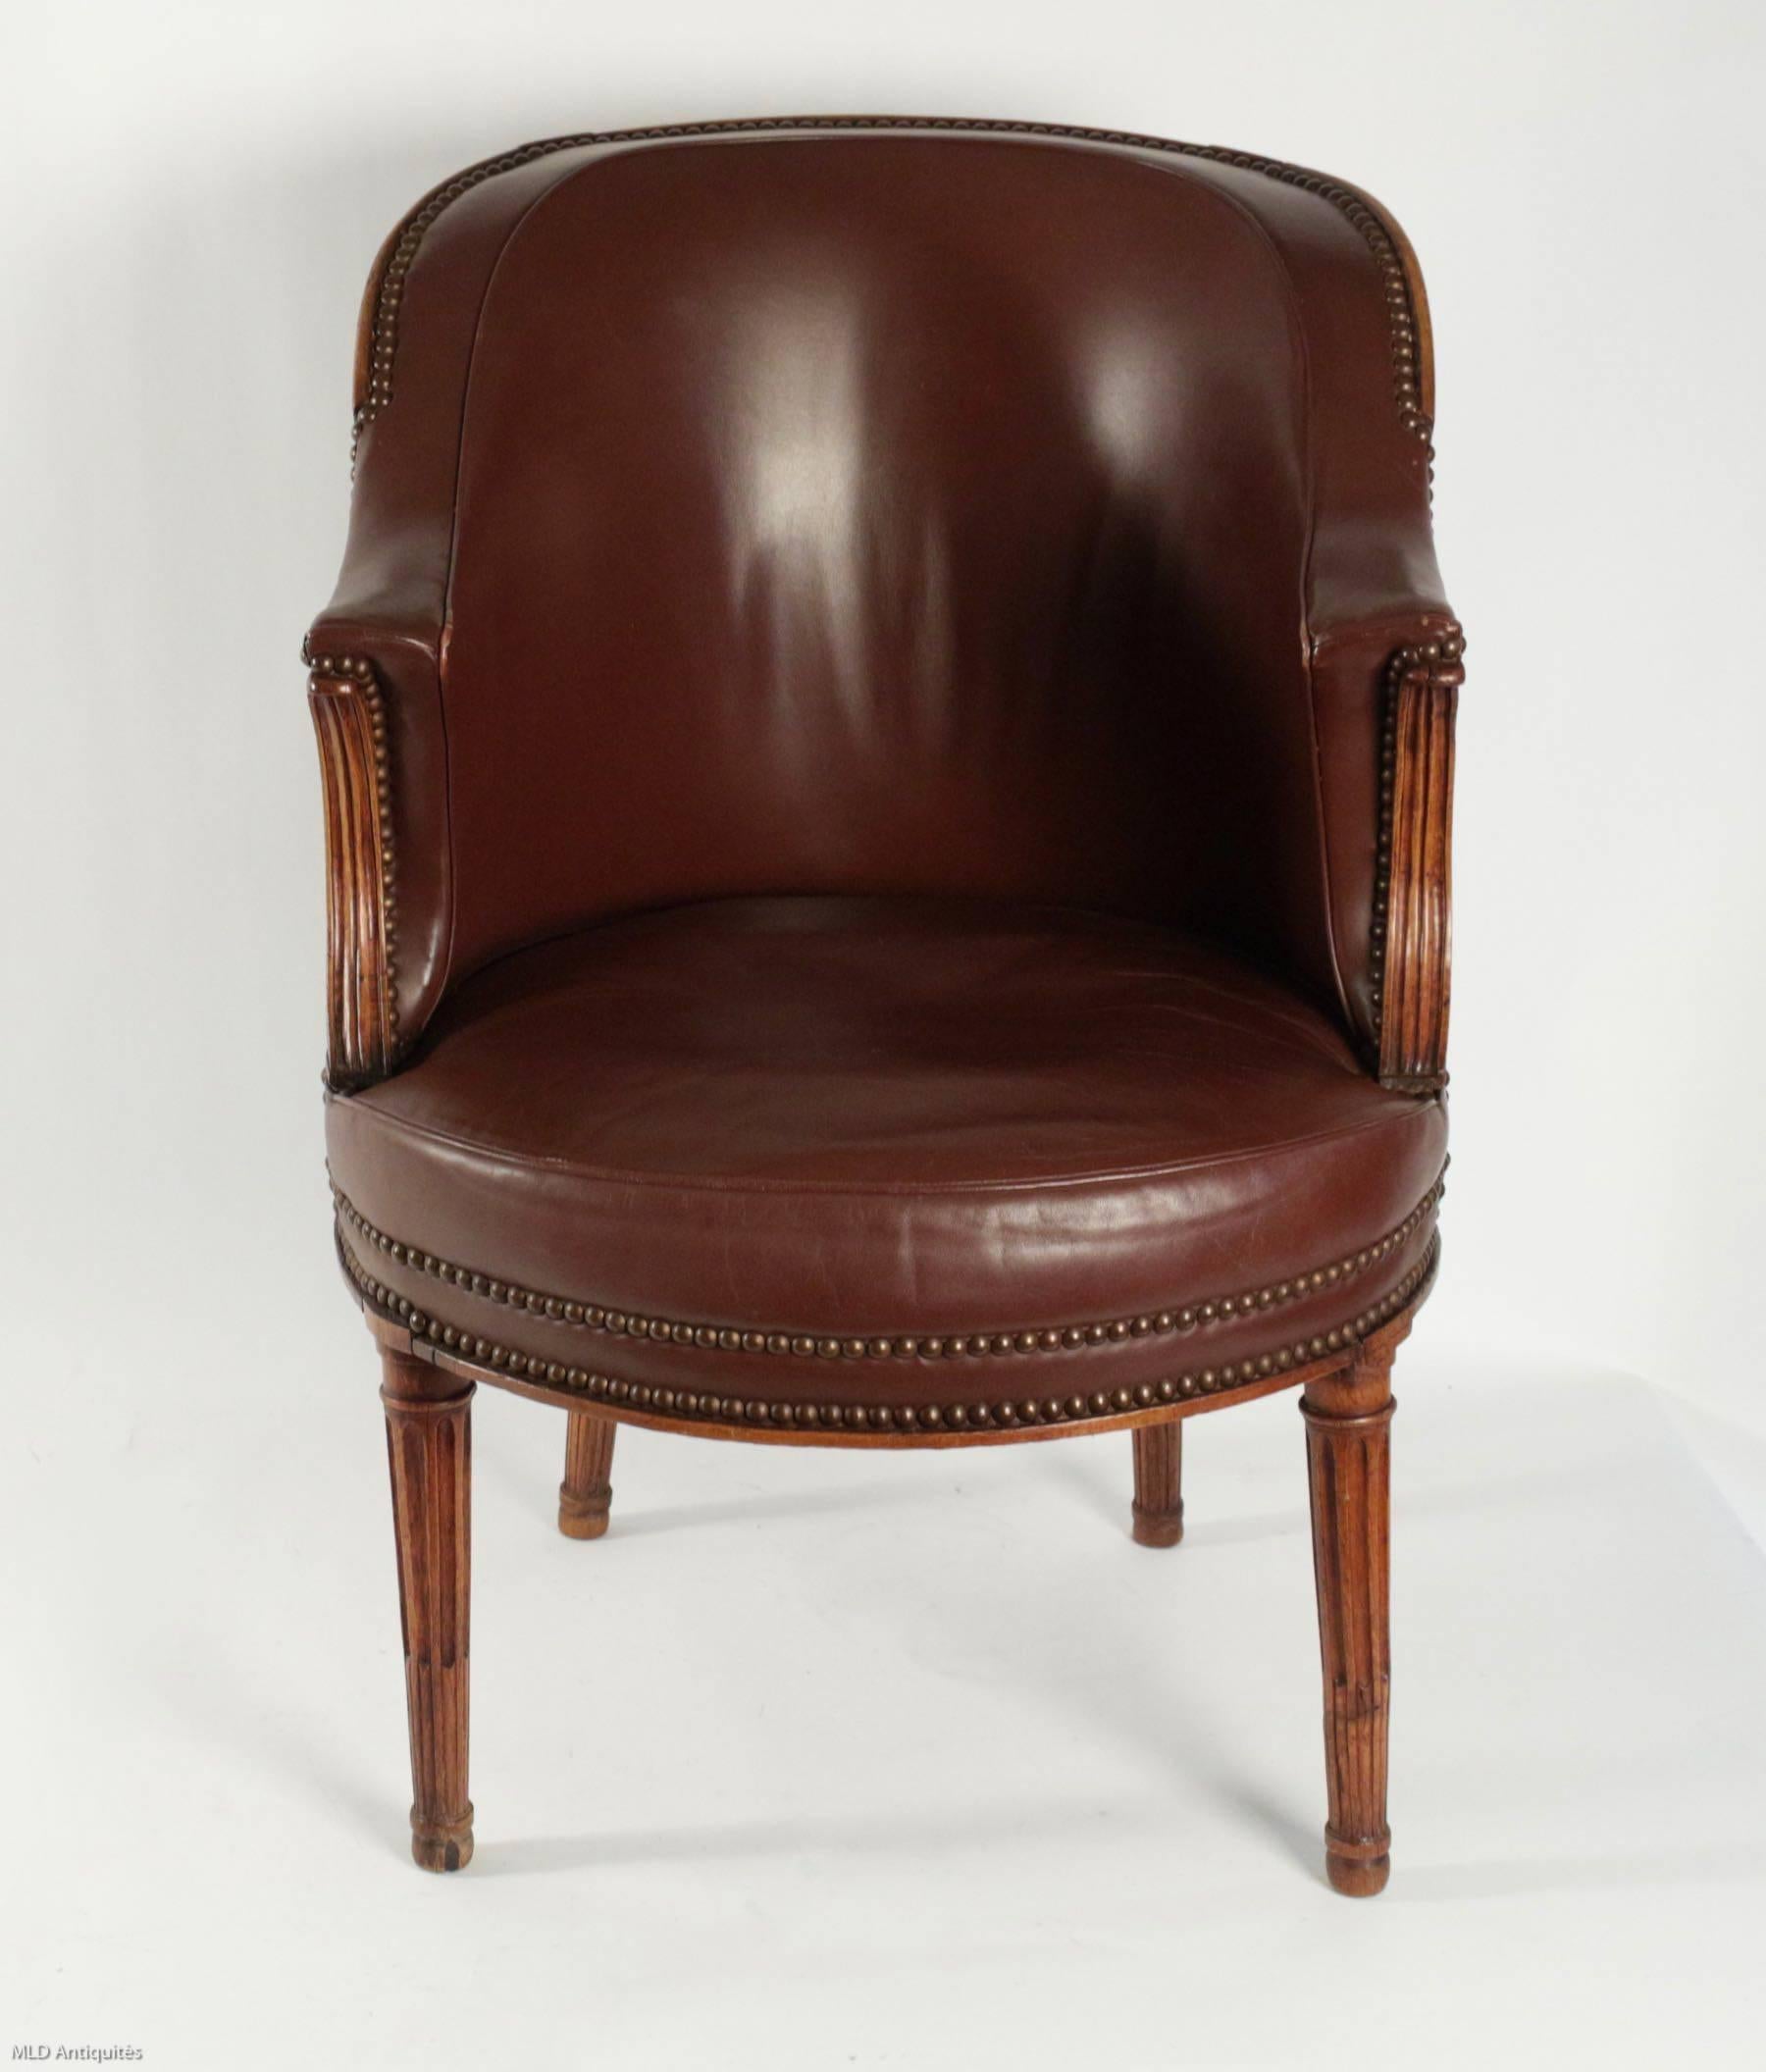 Something rare, Beautiful and interesting beechwood cabinet or desk armchair in warm waxed patina and purple leather.
Our cabinet or desk armchair is stamped by Louis-Magdelaine Pluvinet, late 18th century, Louis XVI period circa 1780, from a